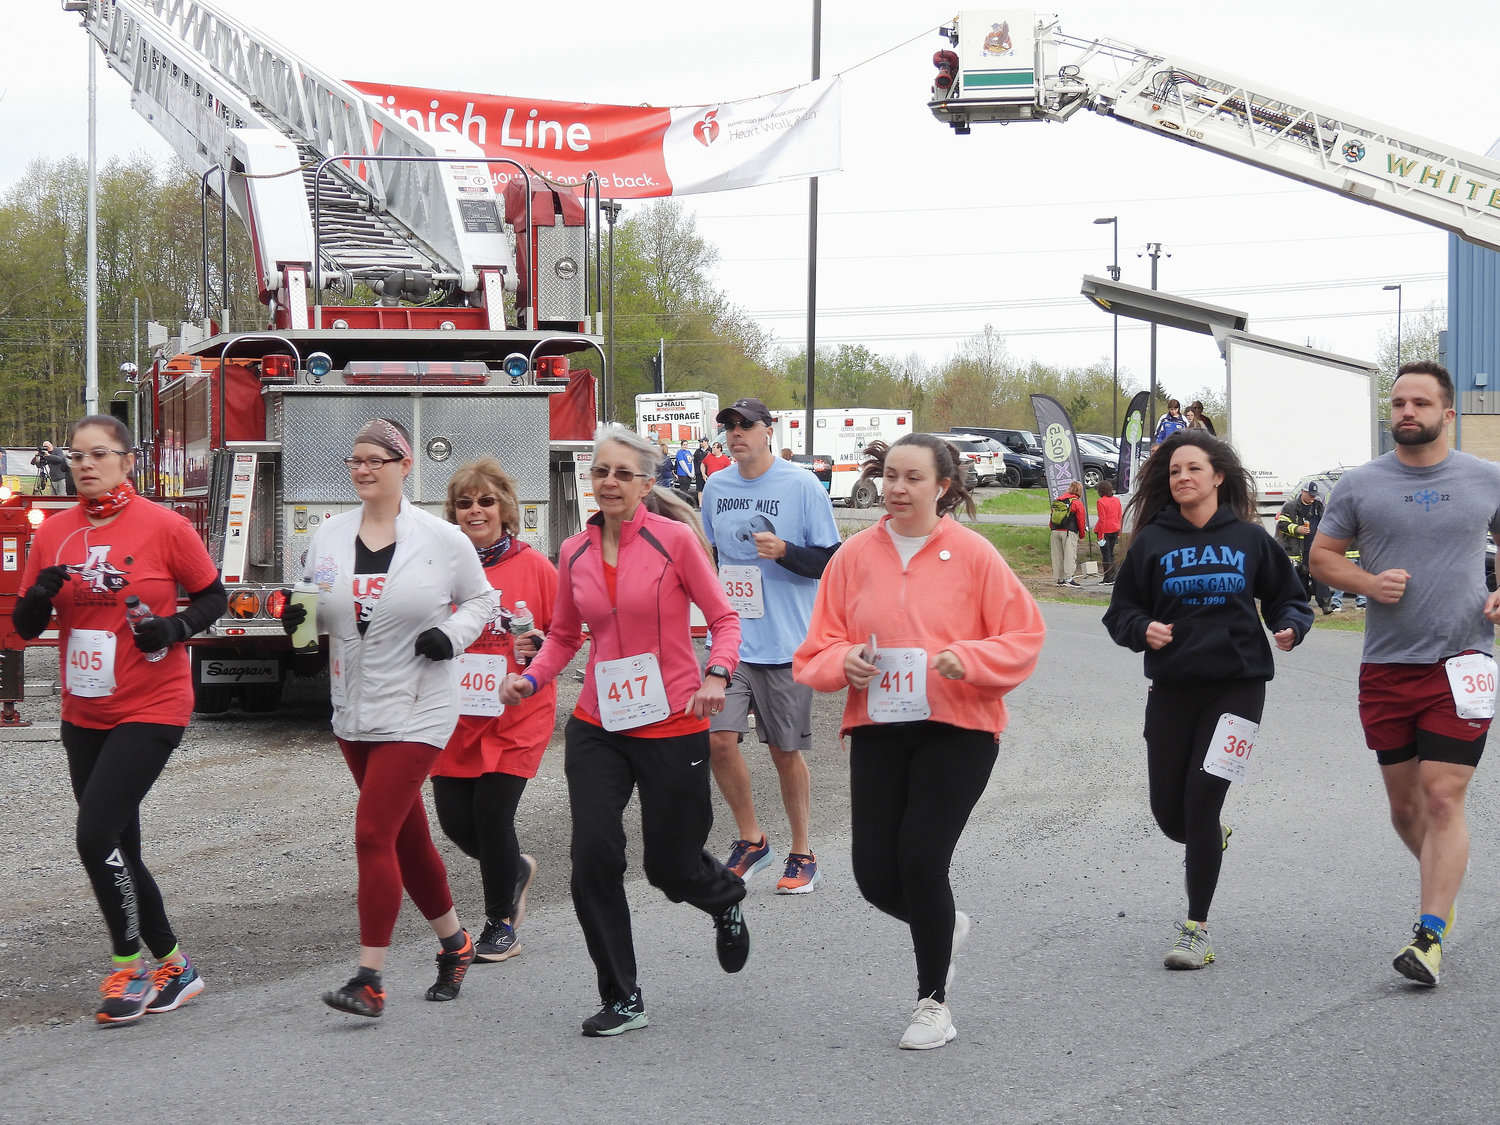 Runners take off for America’s Greatest Heart Run and Walk on Saturday, May 7 from Accelerate Sports, running the 5k to raise awareness and support for heart health